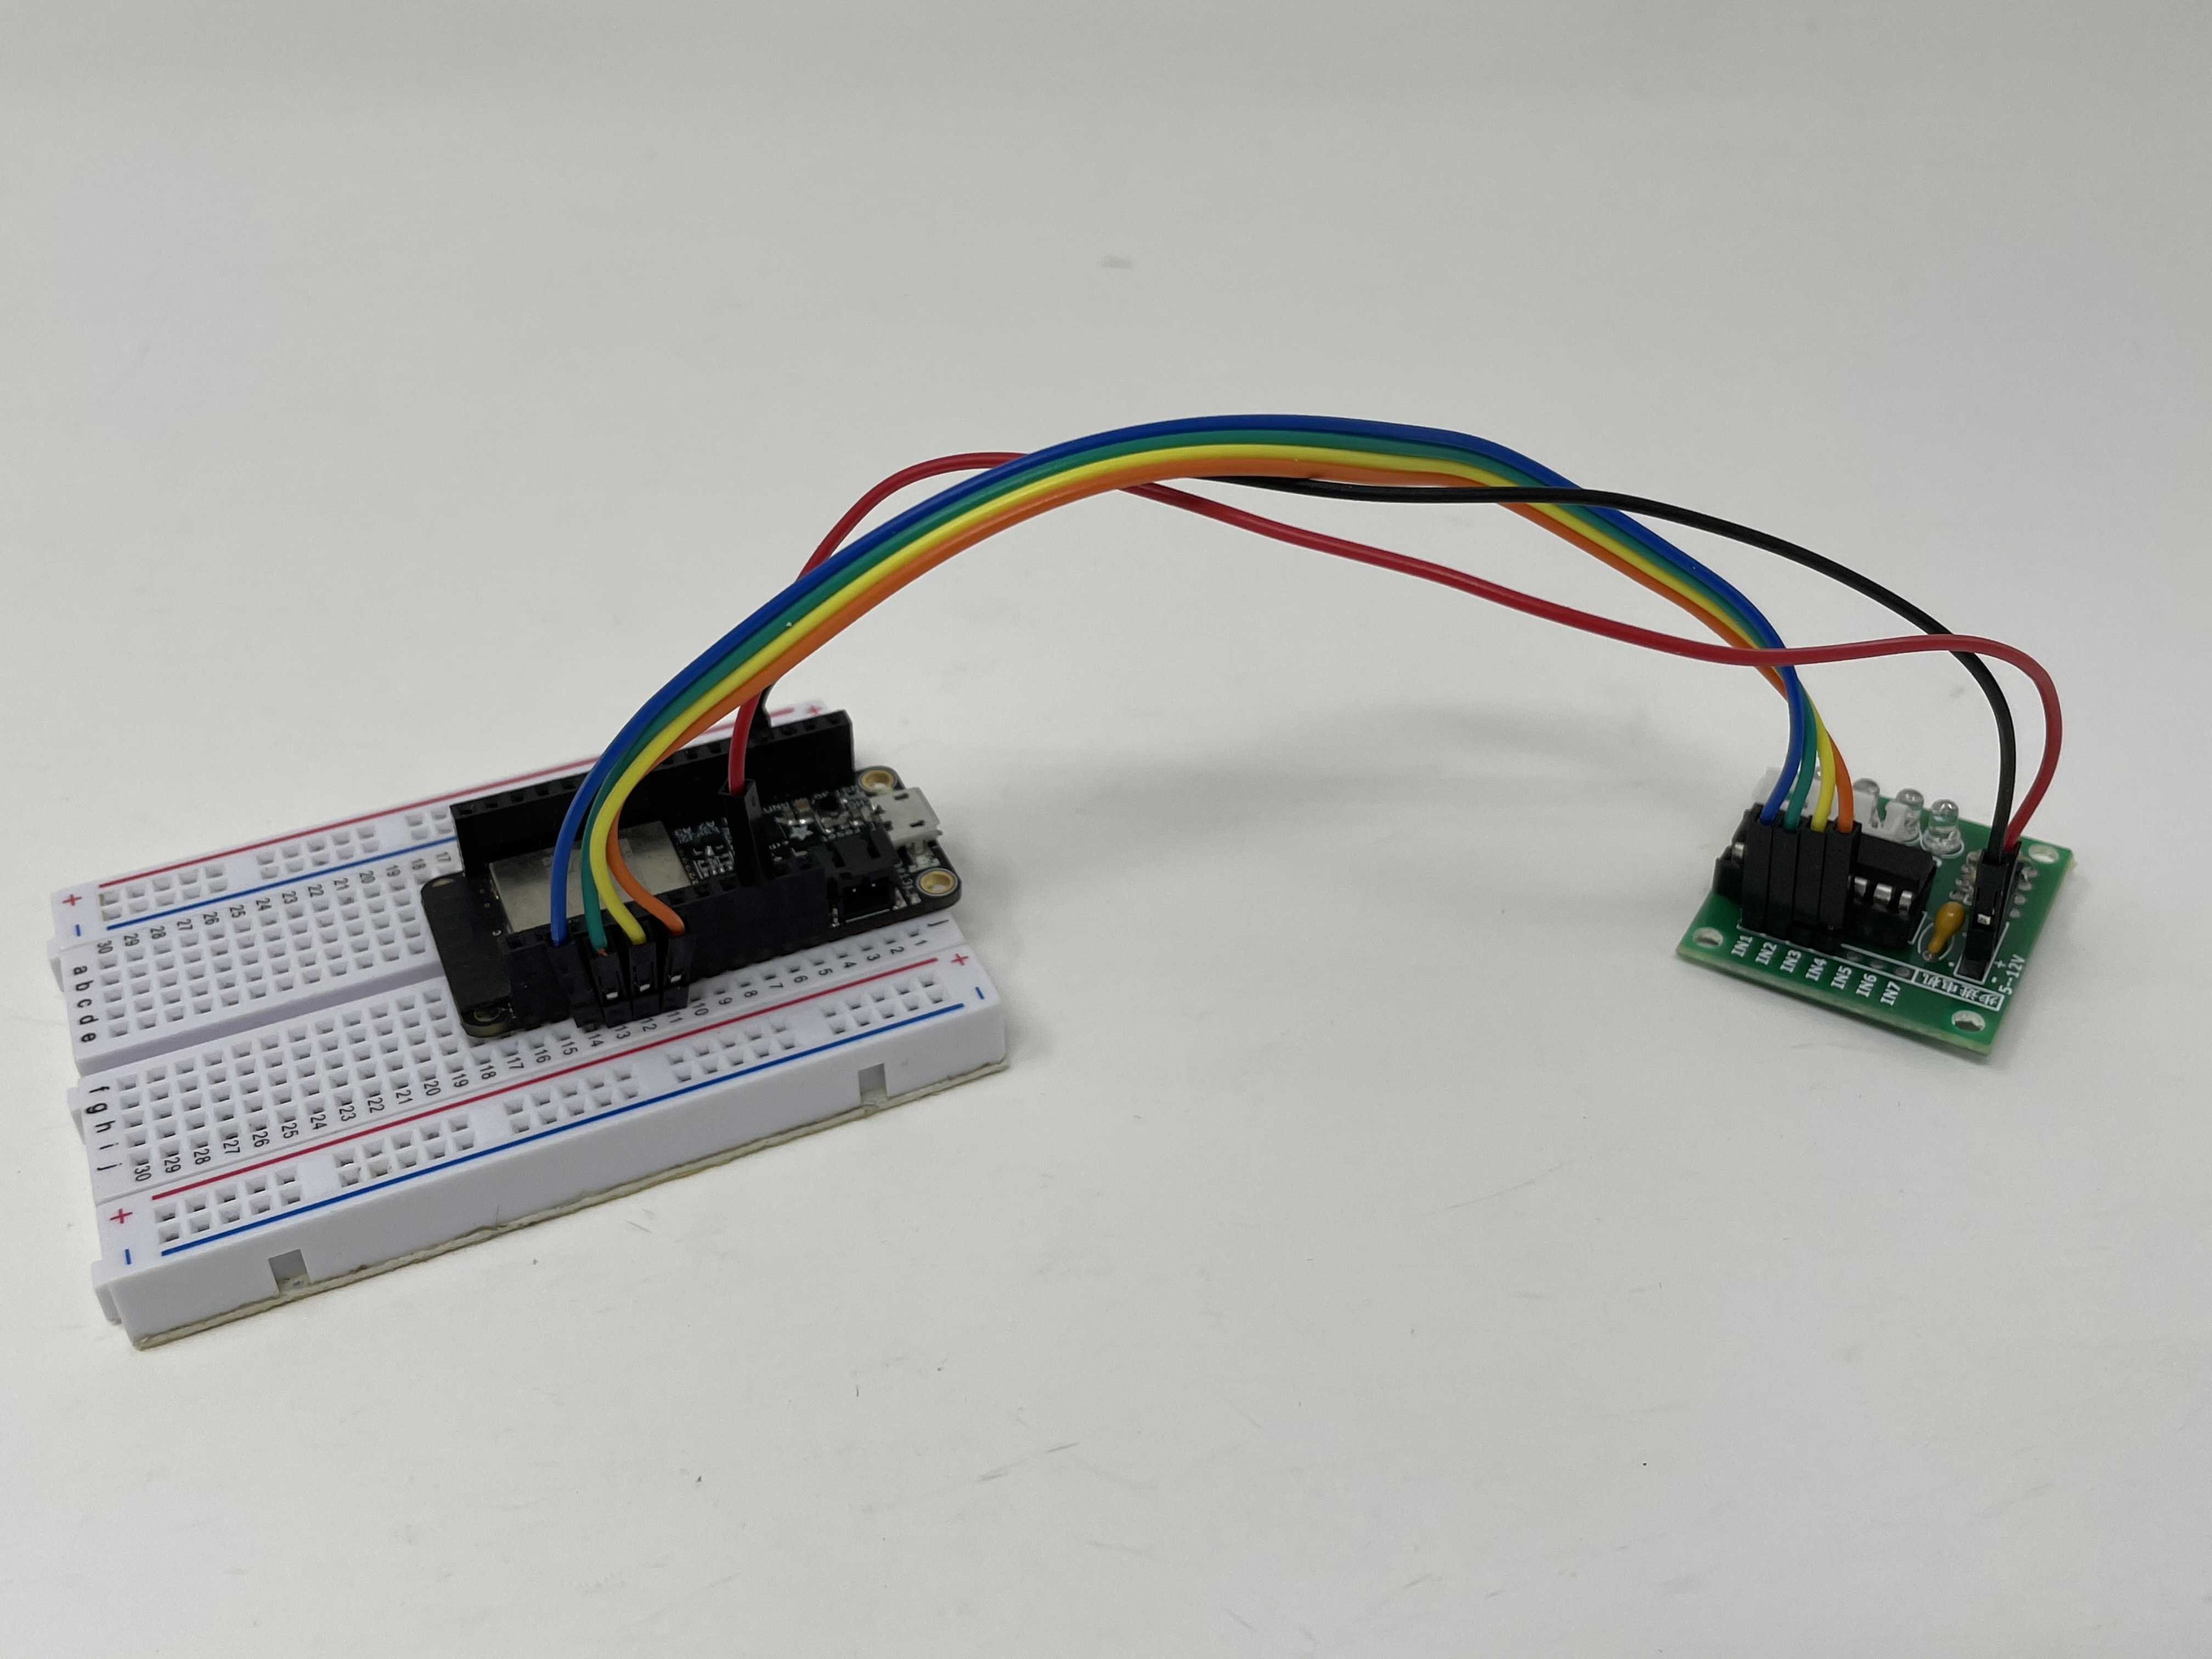 A 3D Printed Electro-Mechanical Seven Segment Display Using Only One Motor.